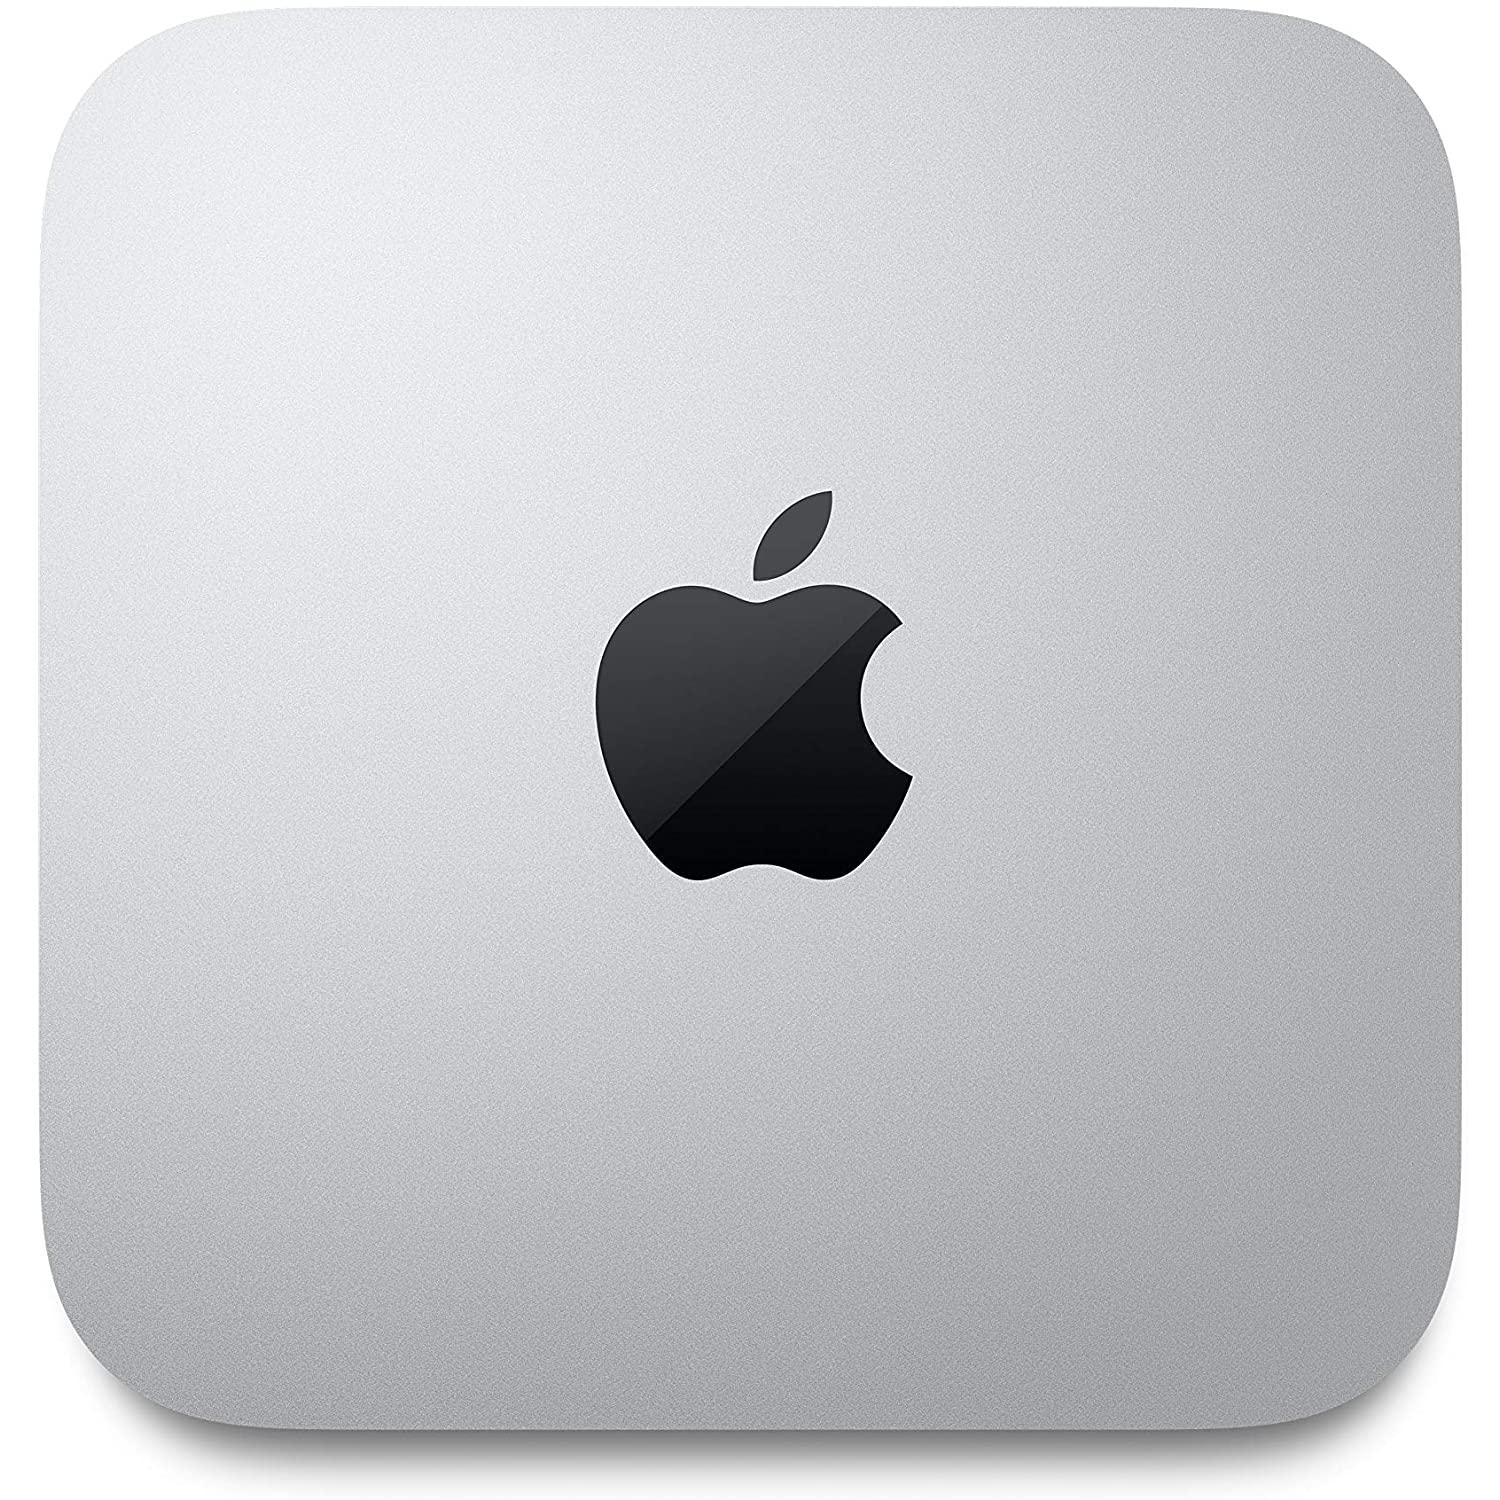 Apple Mac mini with Apple M1 Chip for $599.99 Shipped